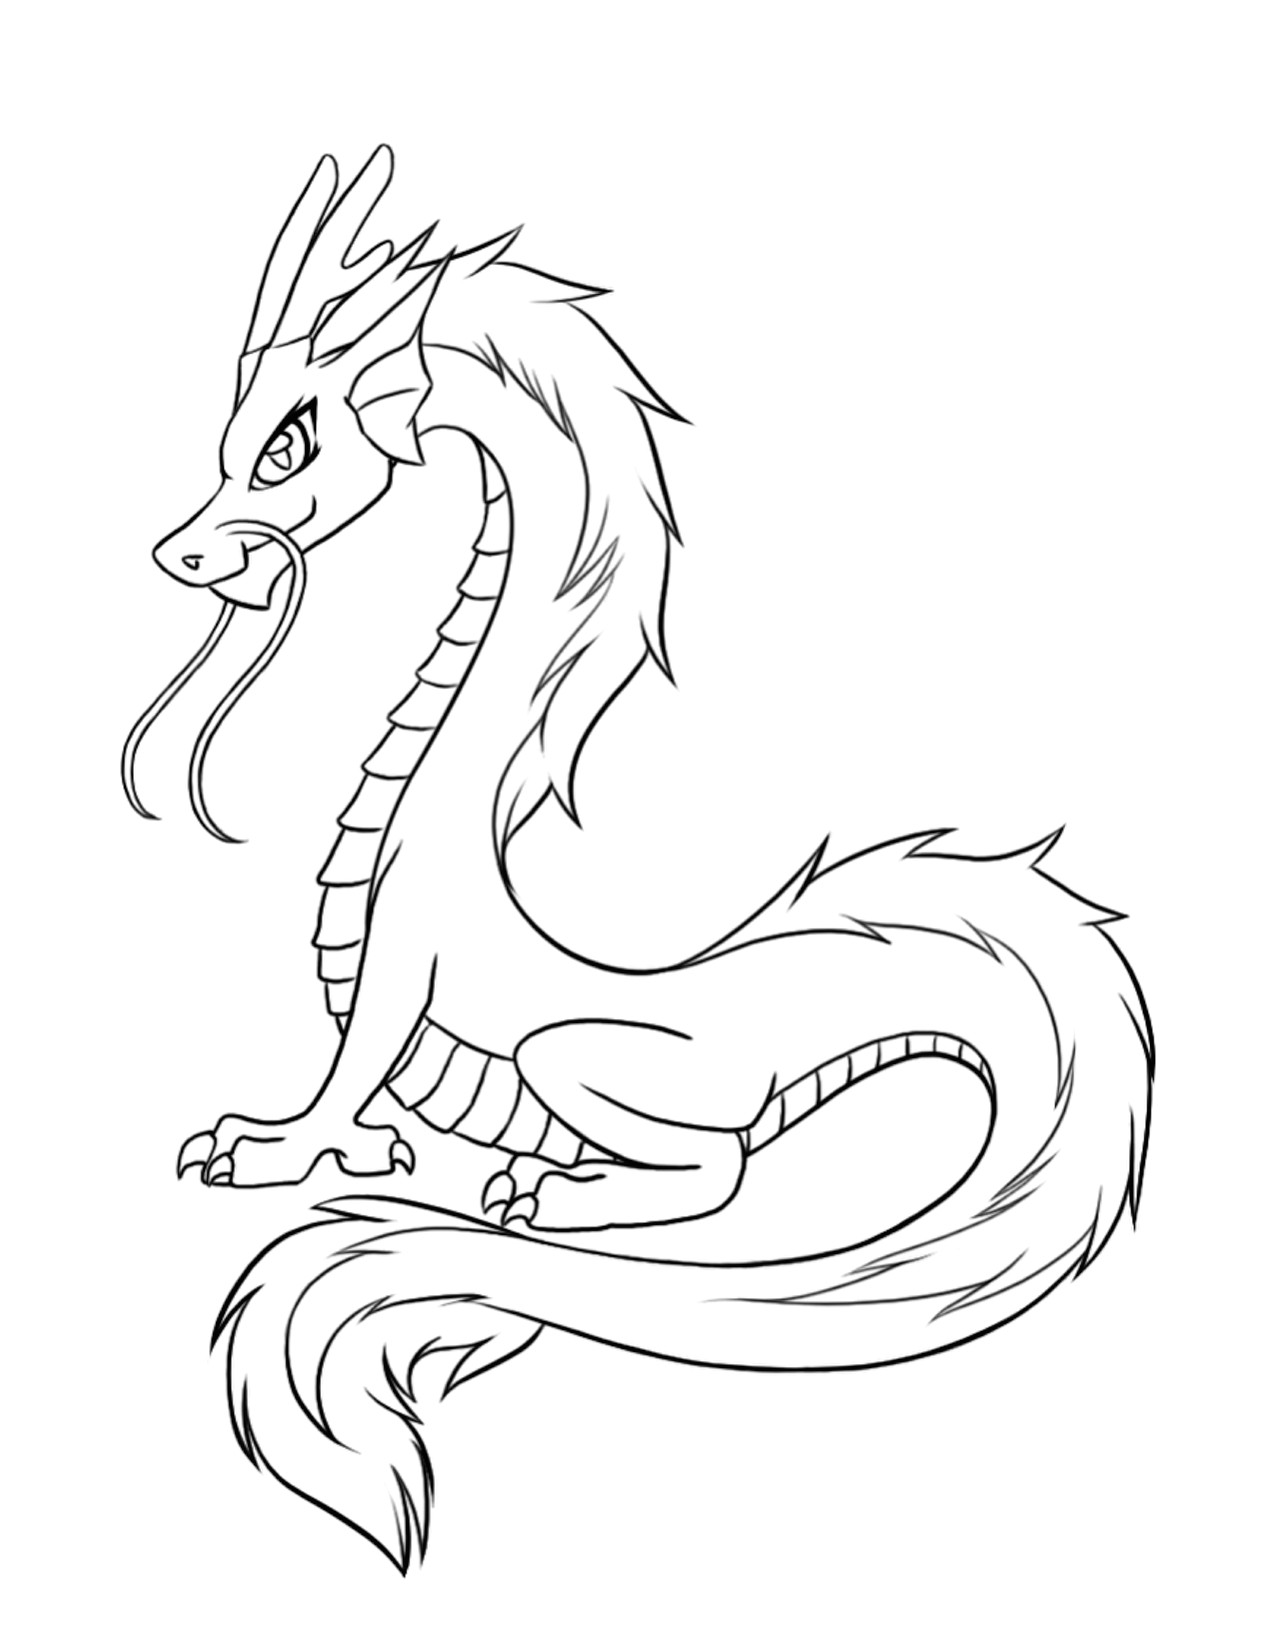 Drawing Chinese Dragons Free Printable Dragon Coloring Pages for Kids Dragon Sketch